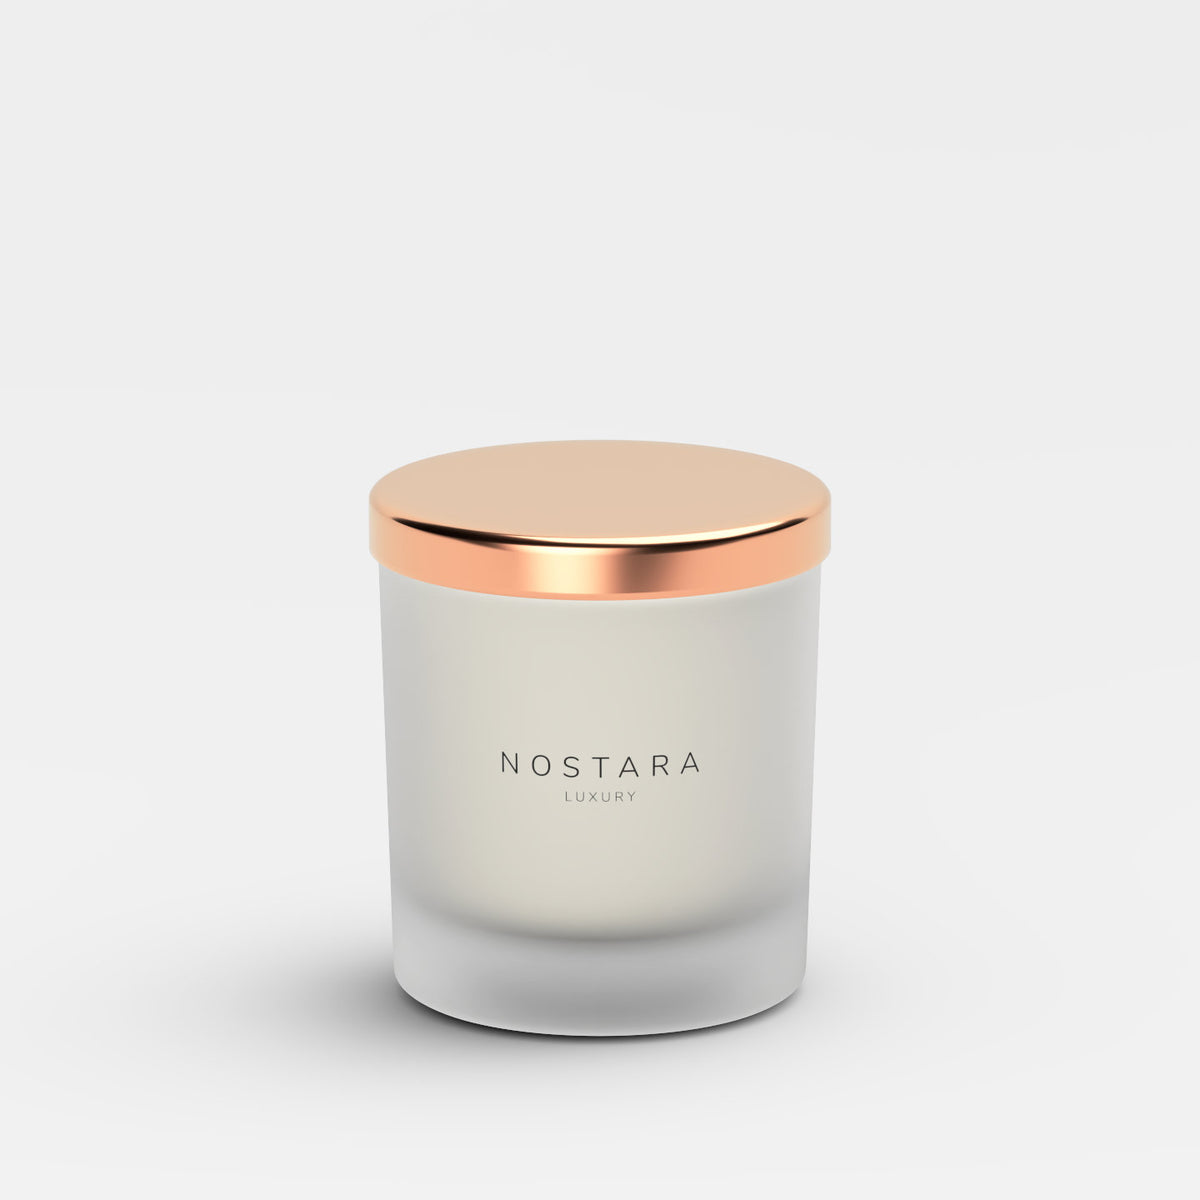 Nostara Linen &amp; White Gardenia Scented Candle with Lid Image